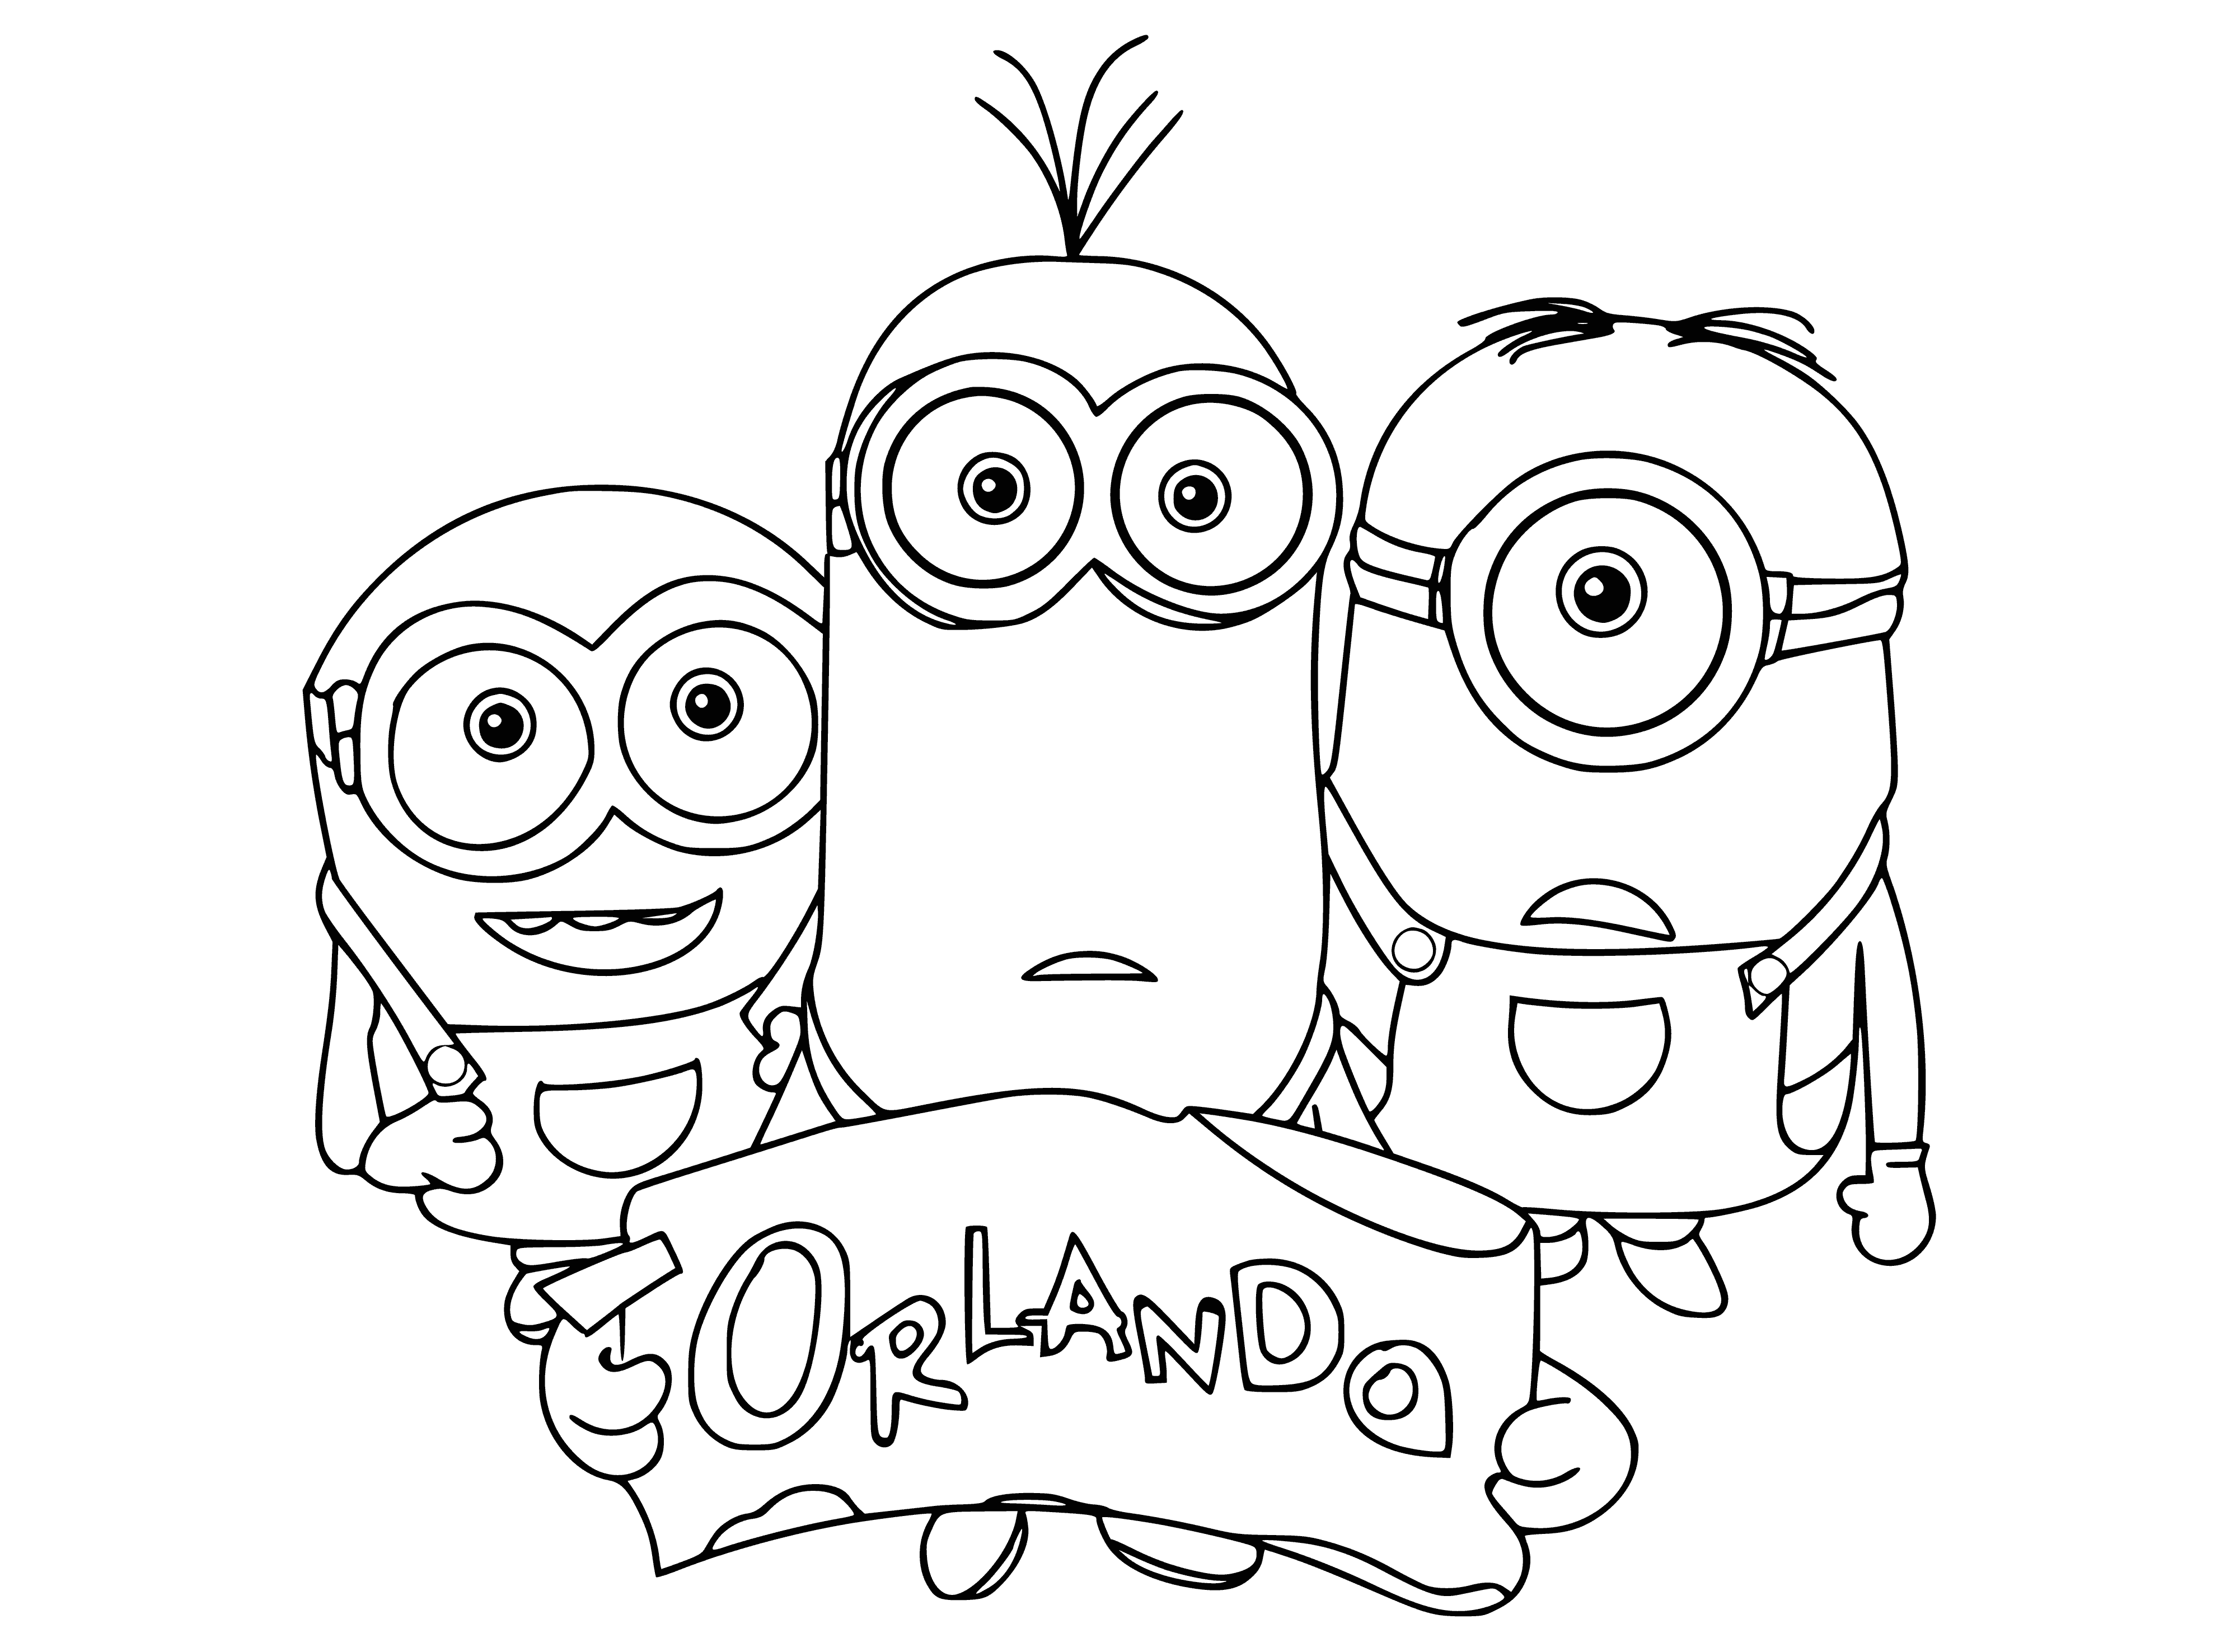 coloring page: Minions gather around map of Orlando, planning their trip to the "happiest place on earth", all in their signature blue and yellow attire. Excited chatter fills the air.